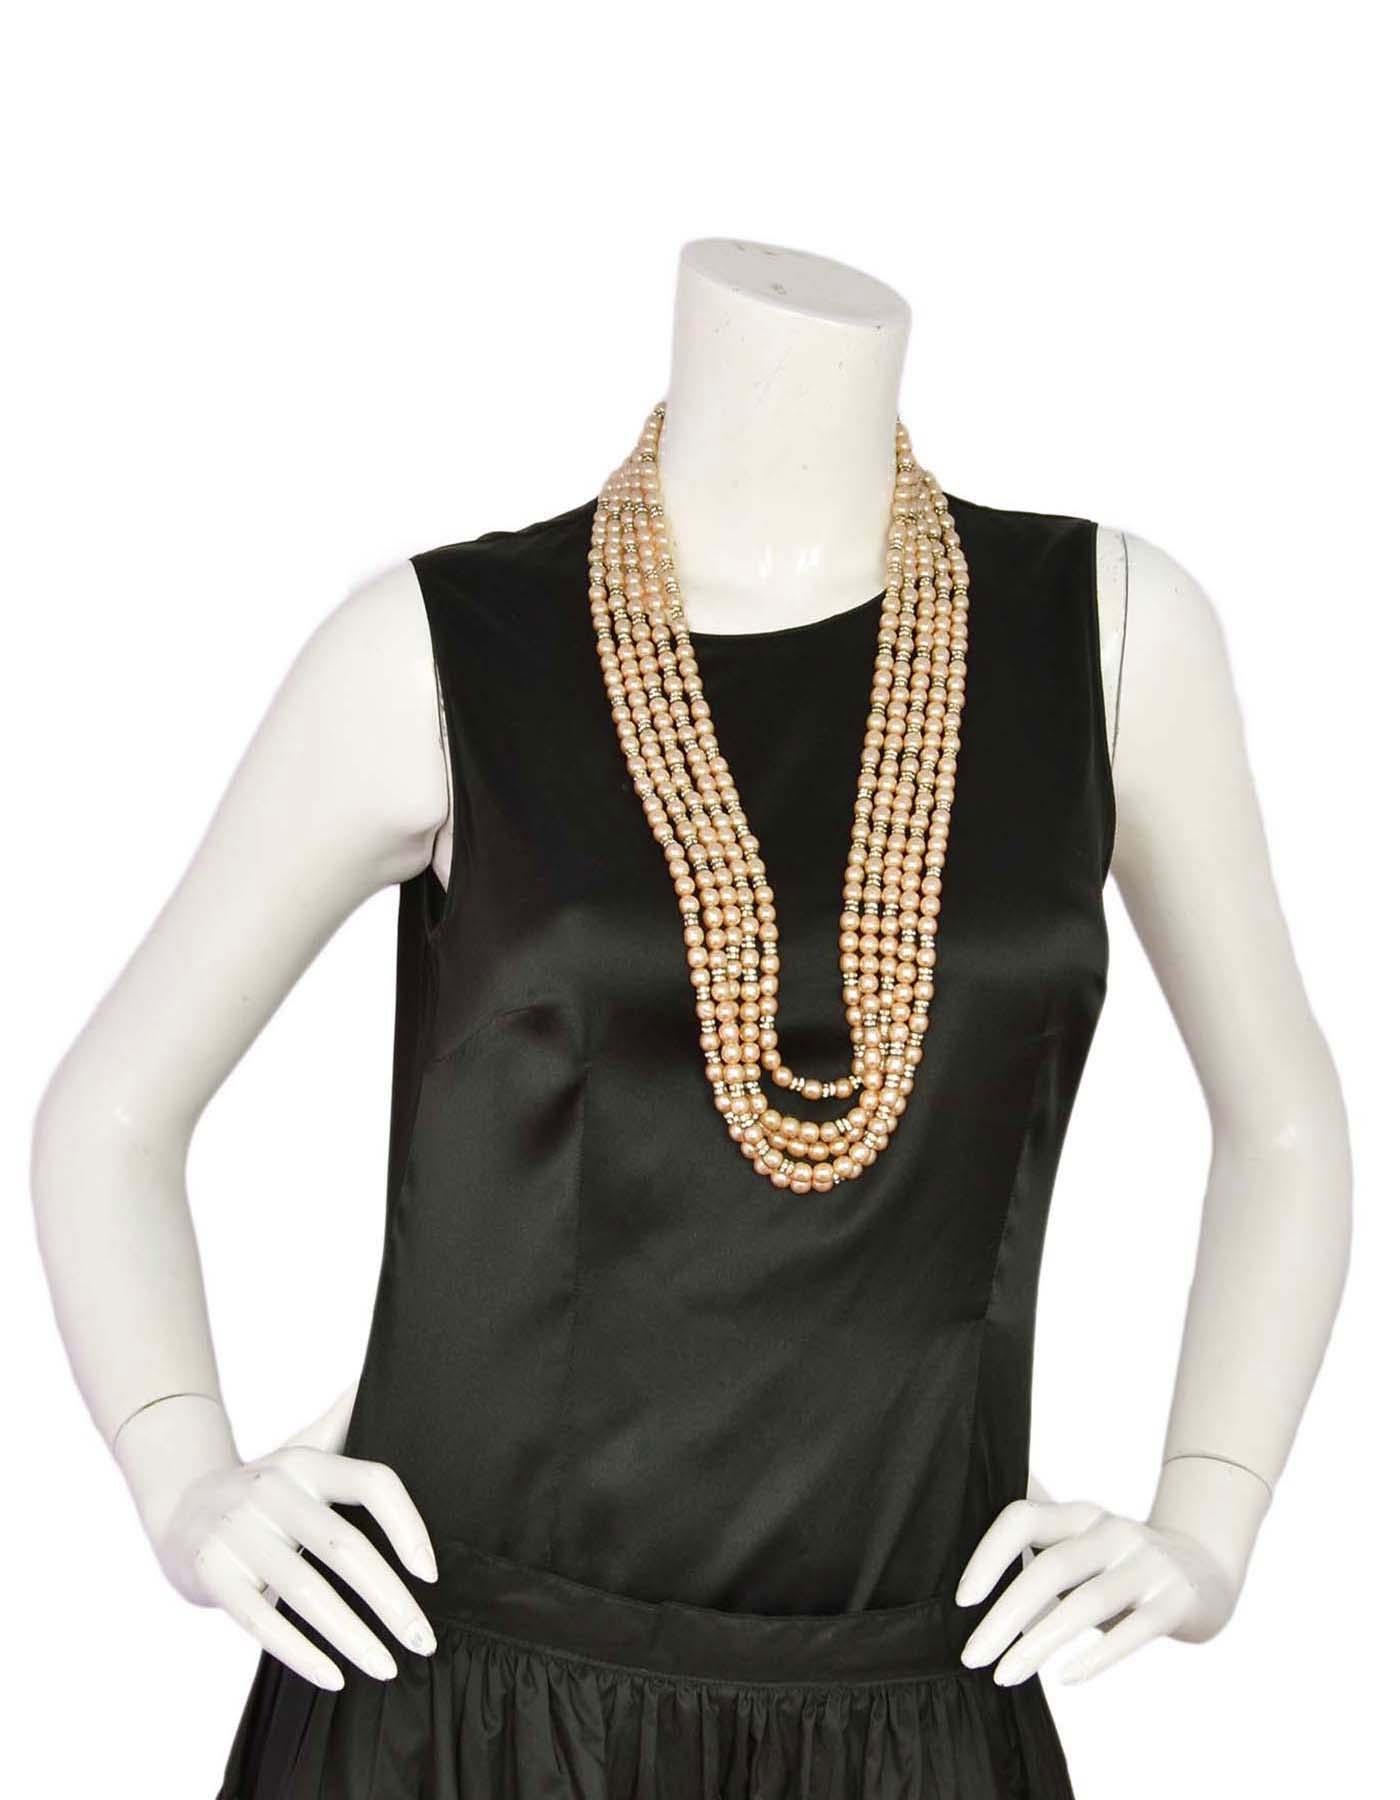 Chanel Vintage '90s Multi-Strand Pearl & Crystal Rondelle Necklace

Made In: France
Year of Production: 1990-1992
Color: Ivory and goldtone
Materials: Faux pearls, metal and rhinestones
Closure: Hook closure
Stamp: Chanel CC Made in France
Overall